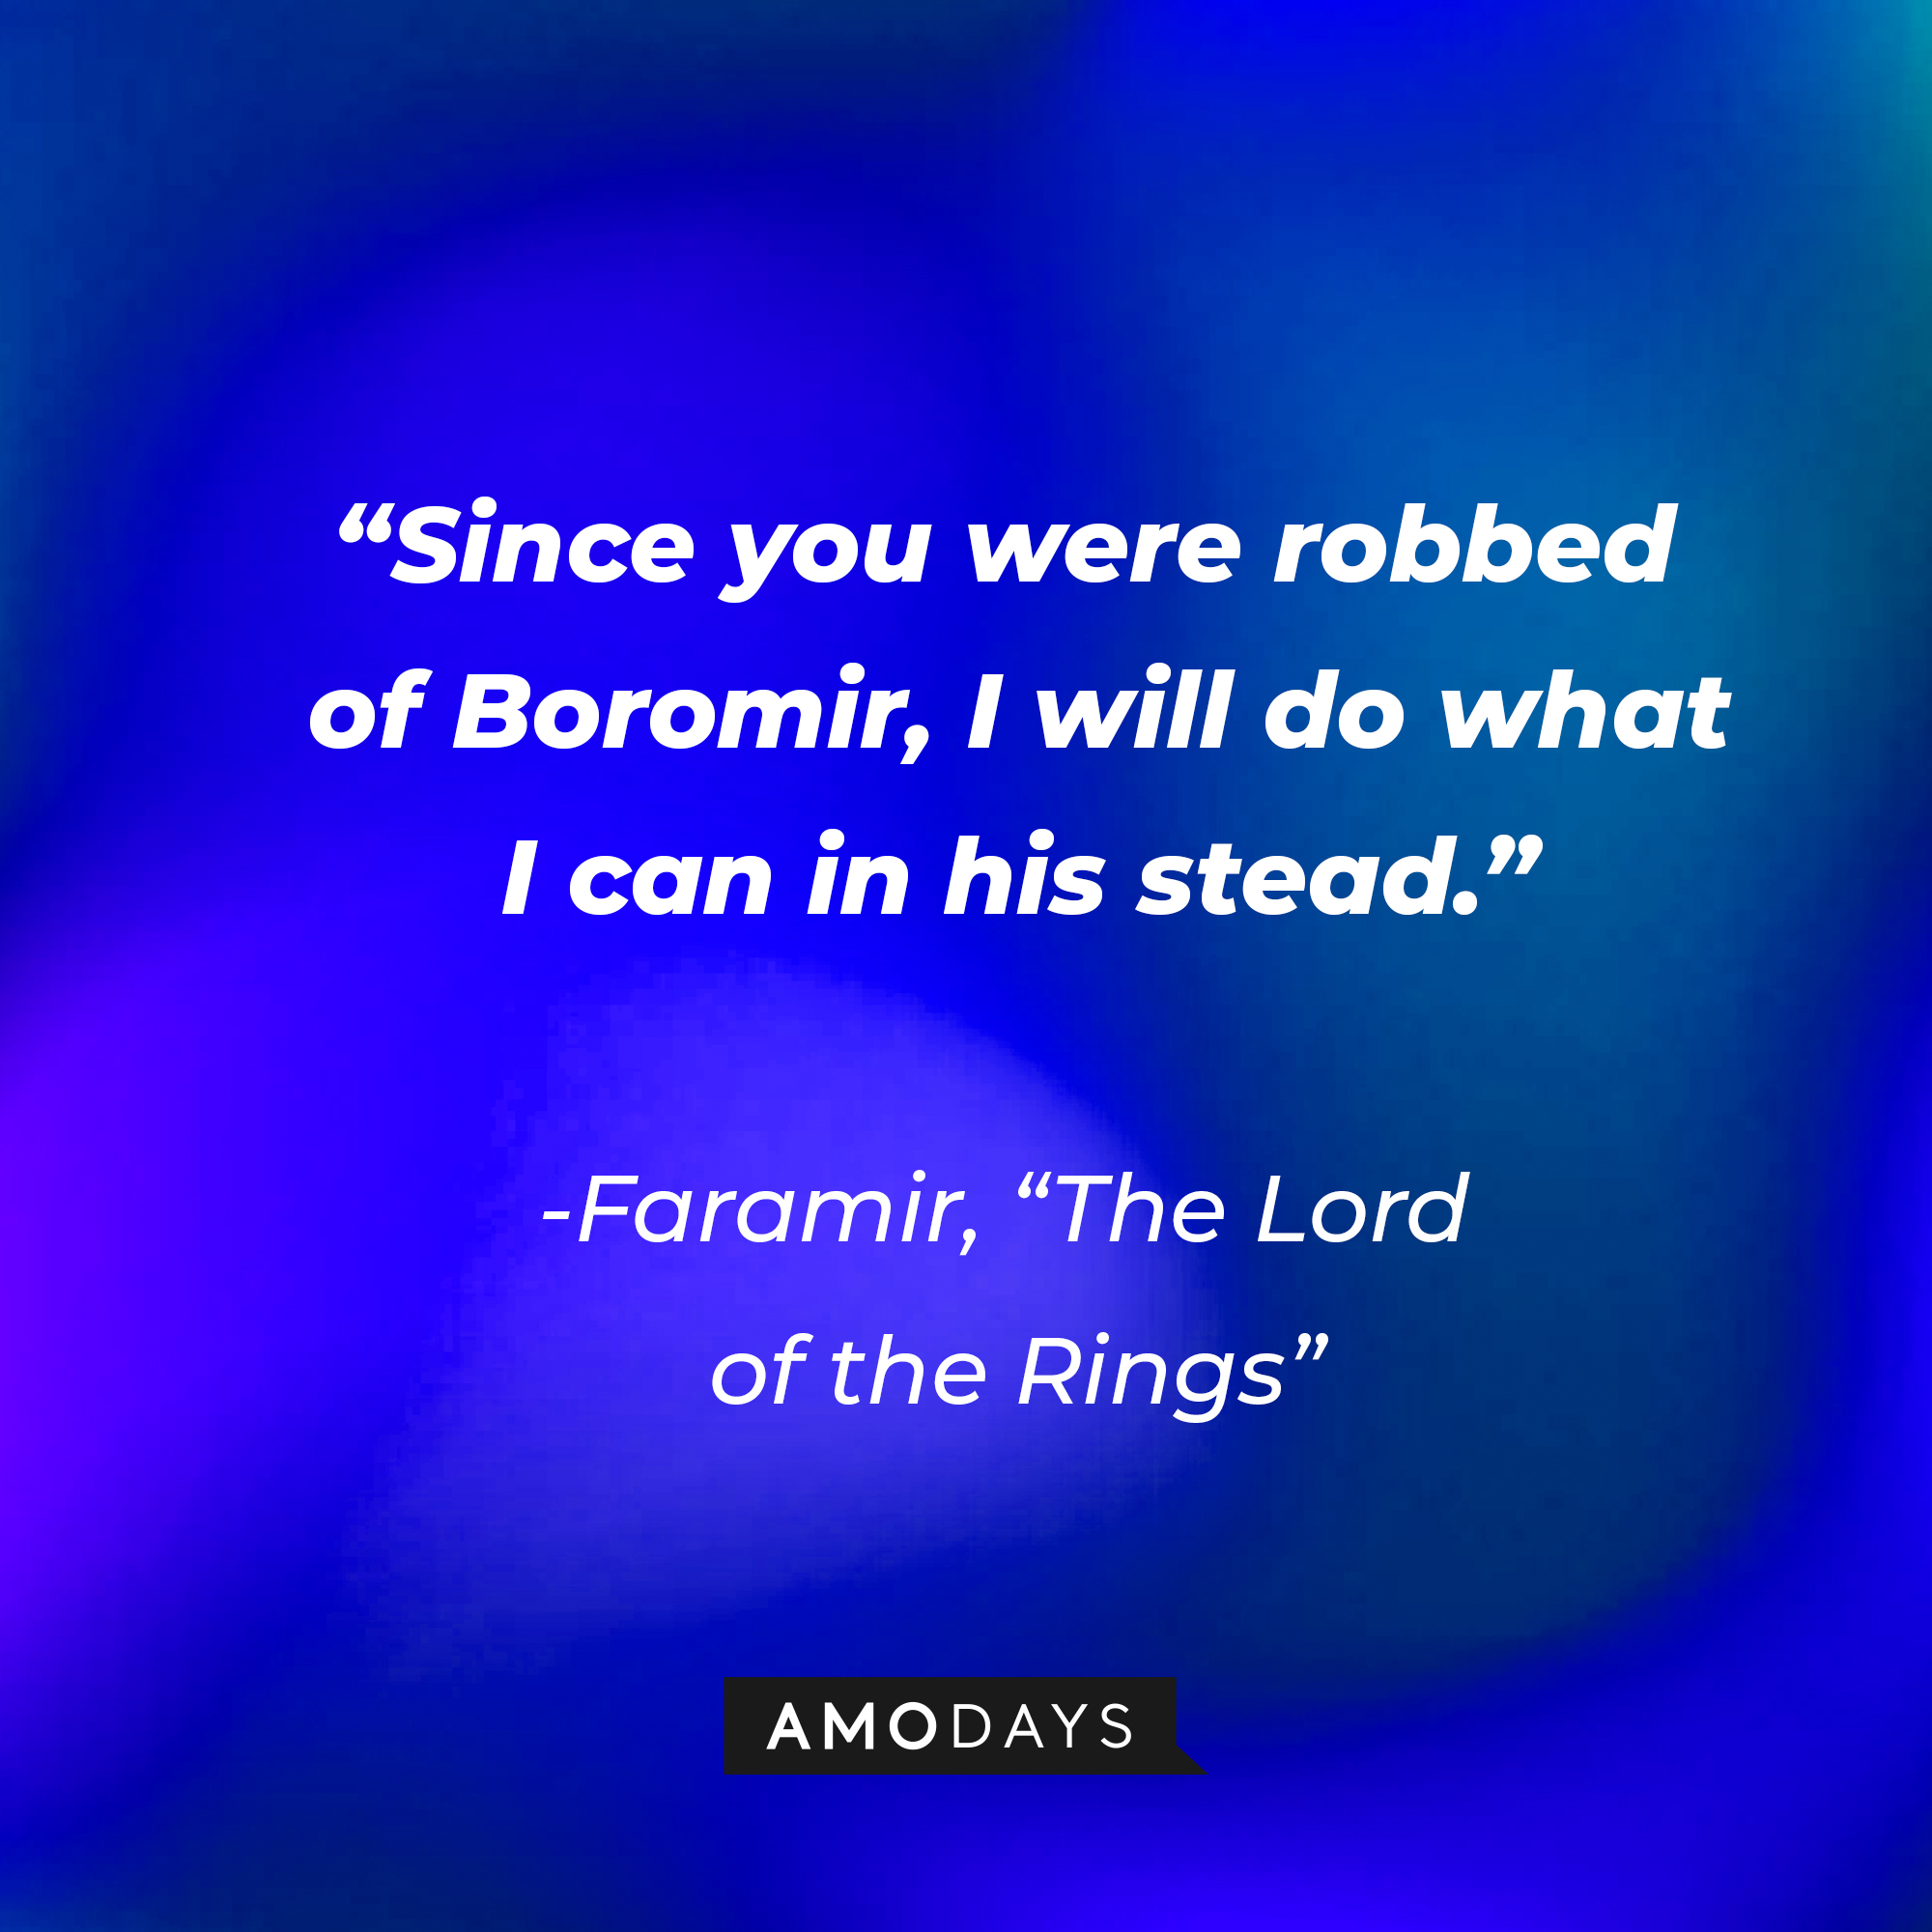 Faramir's quote from "The Lord of the Rings": "Since you were robbed of Boromir, I will do what I can in his stead." | Source: AmoDays